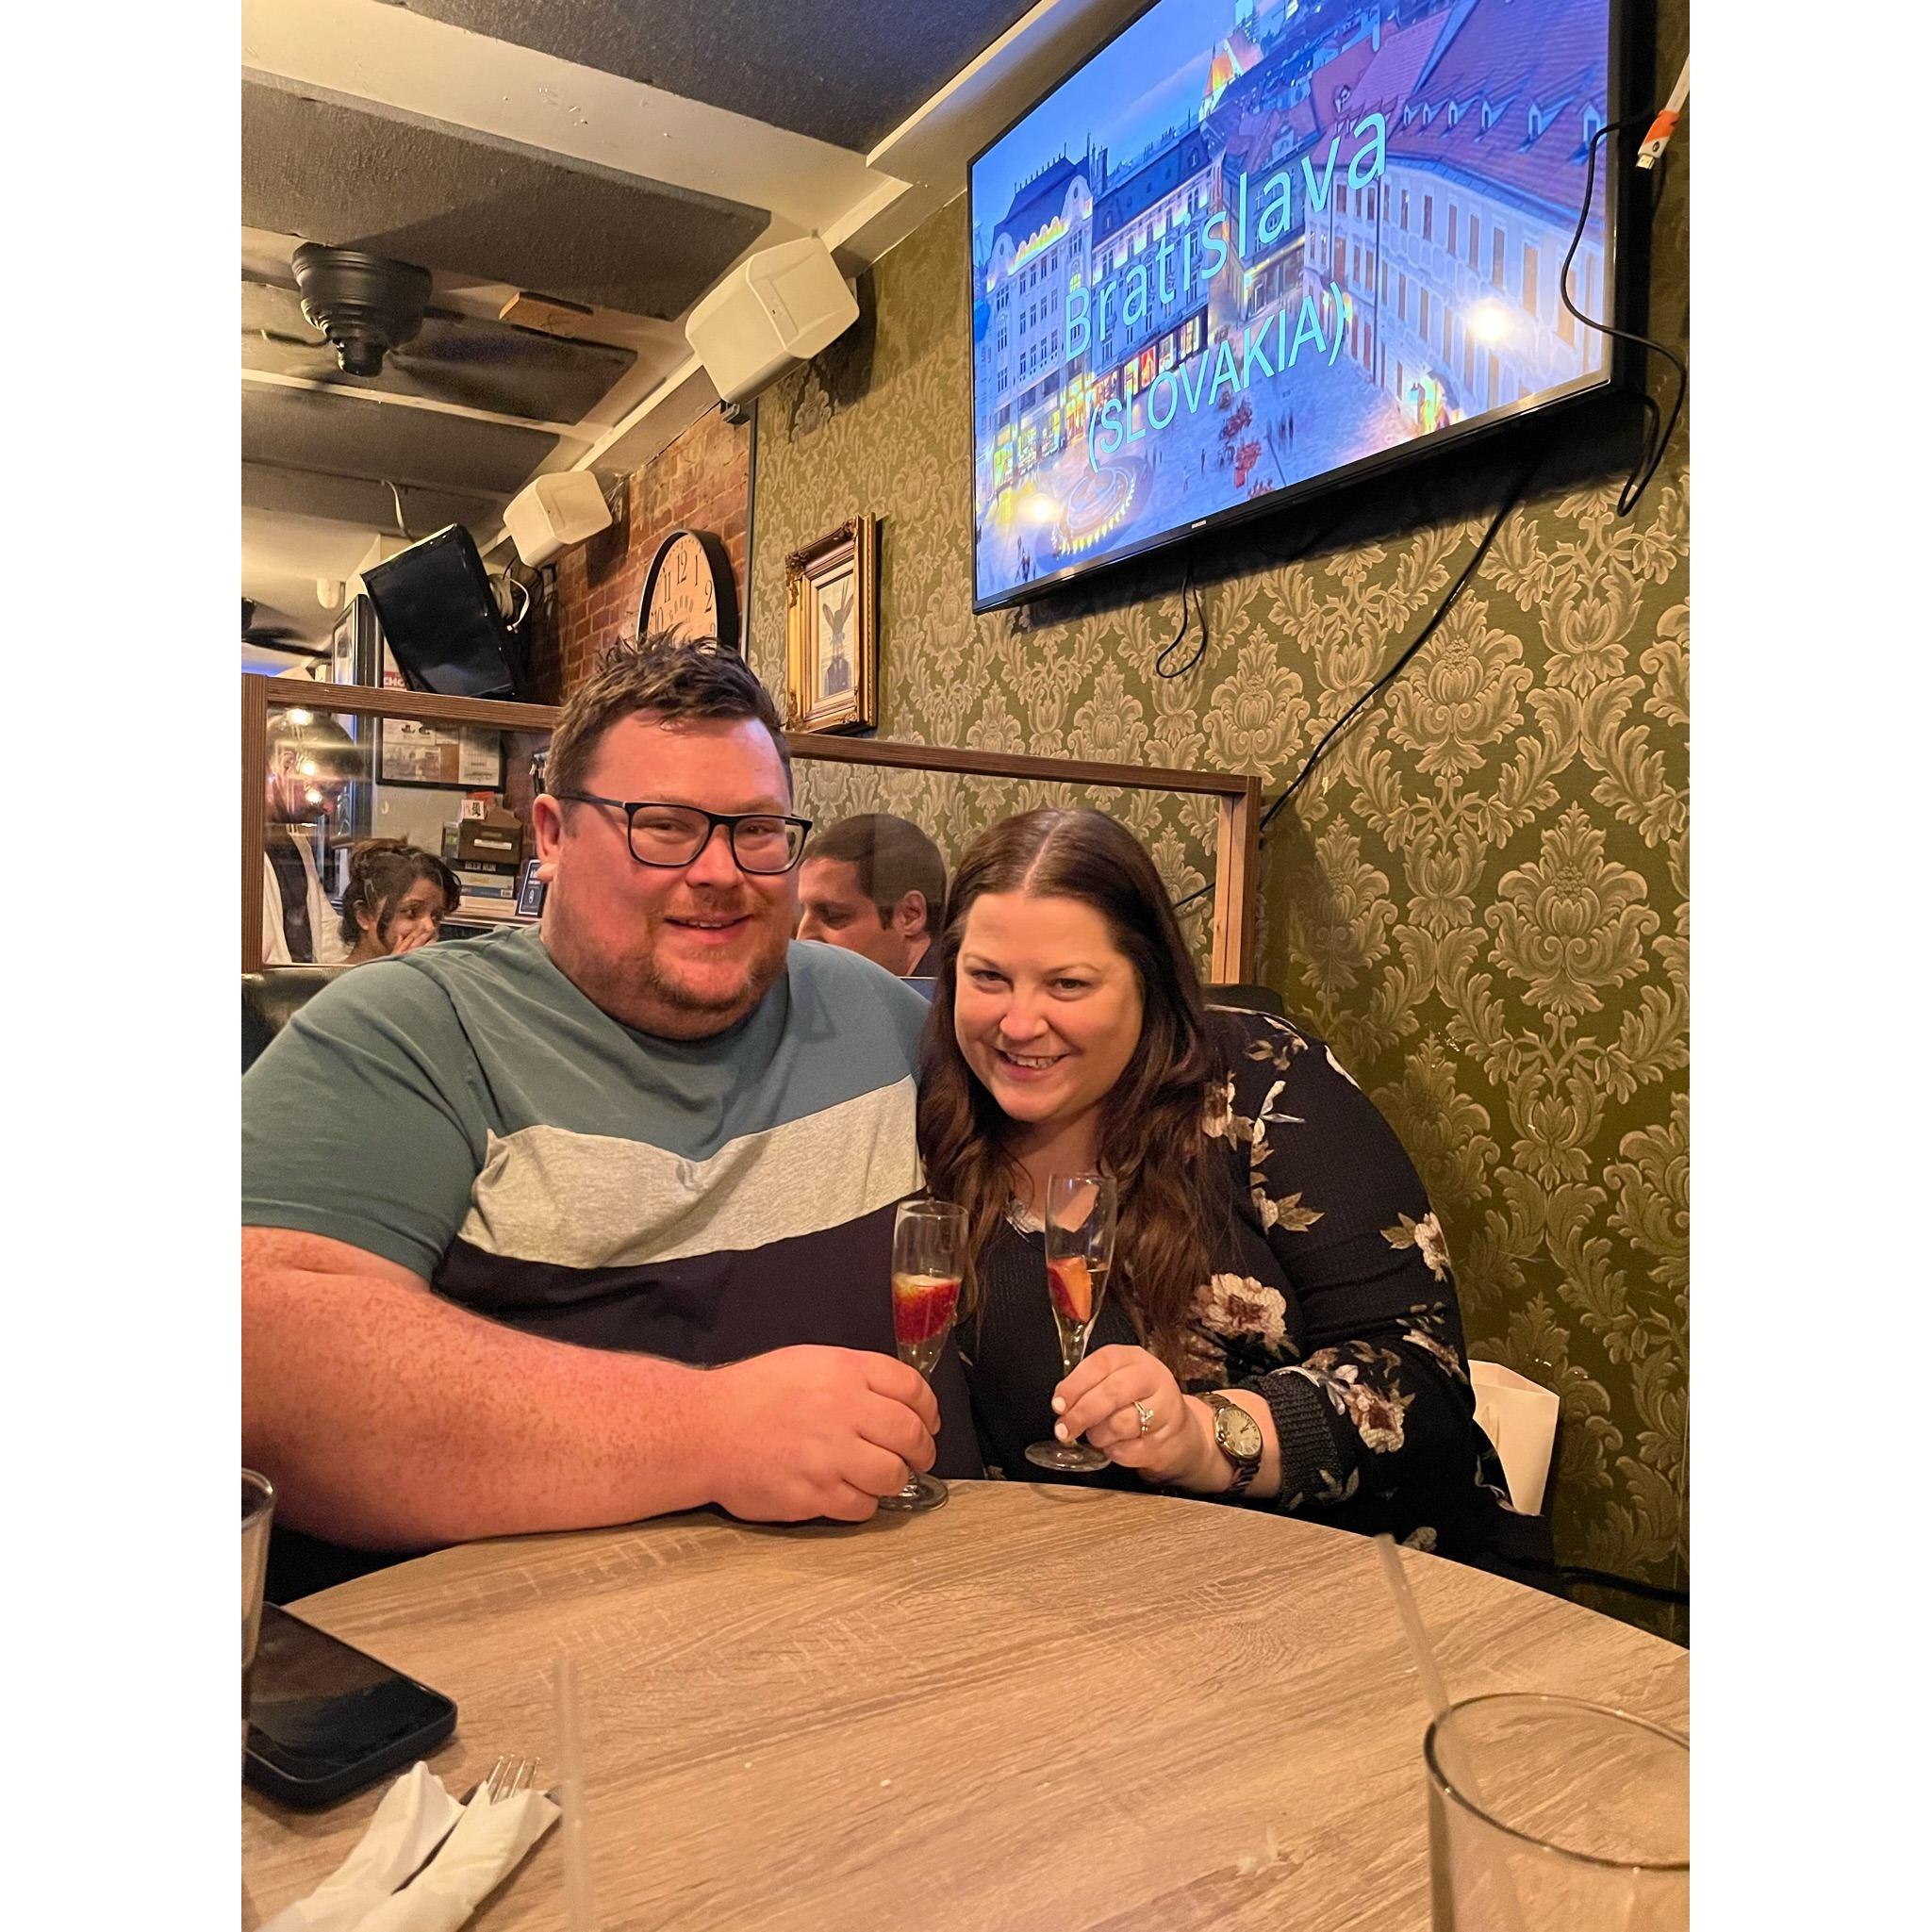 What better way to celebrate getting engaged than going to Trivia 5 minutes later?